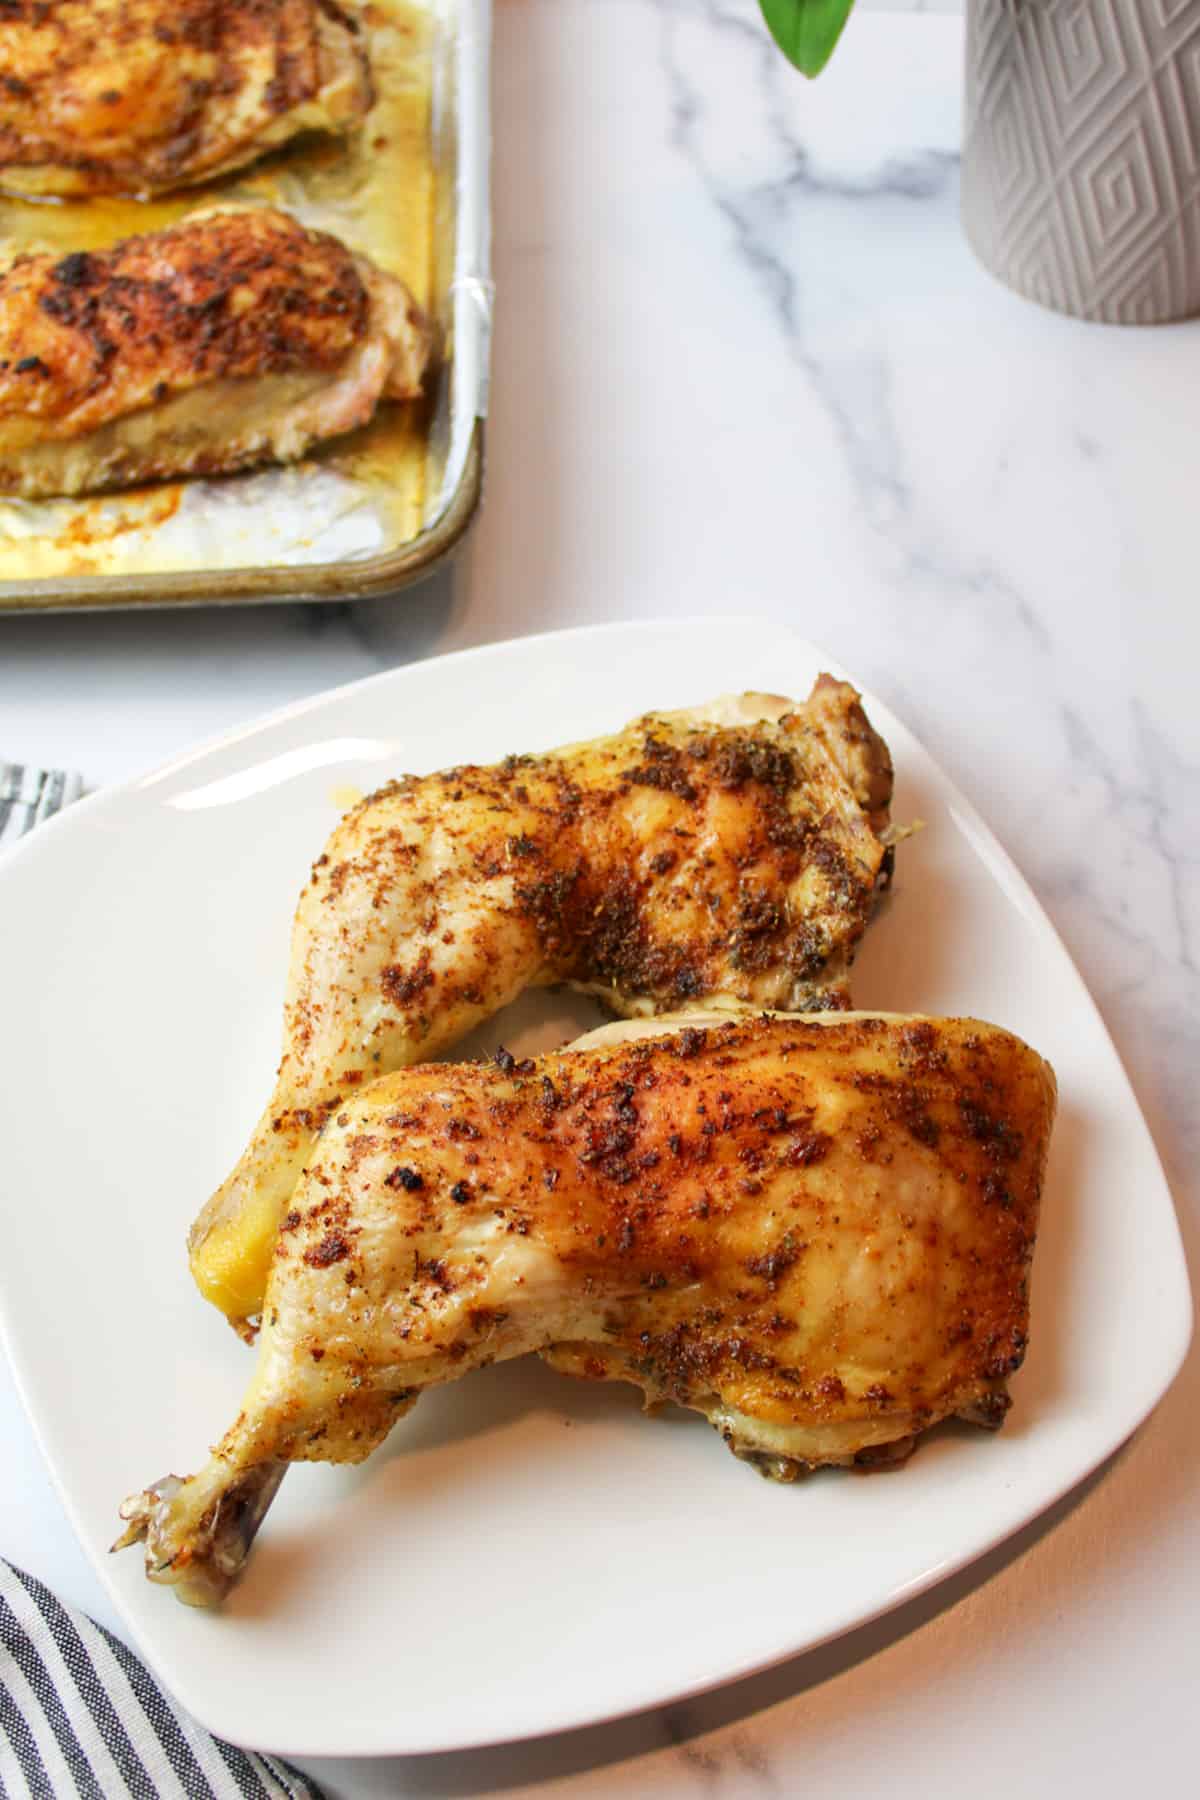 two crispy baked chicken quarters on a plate with more on a baking sheet in background.